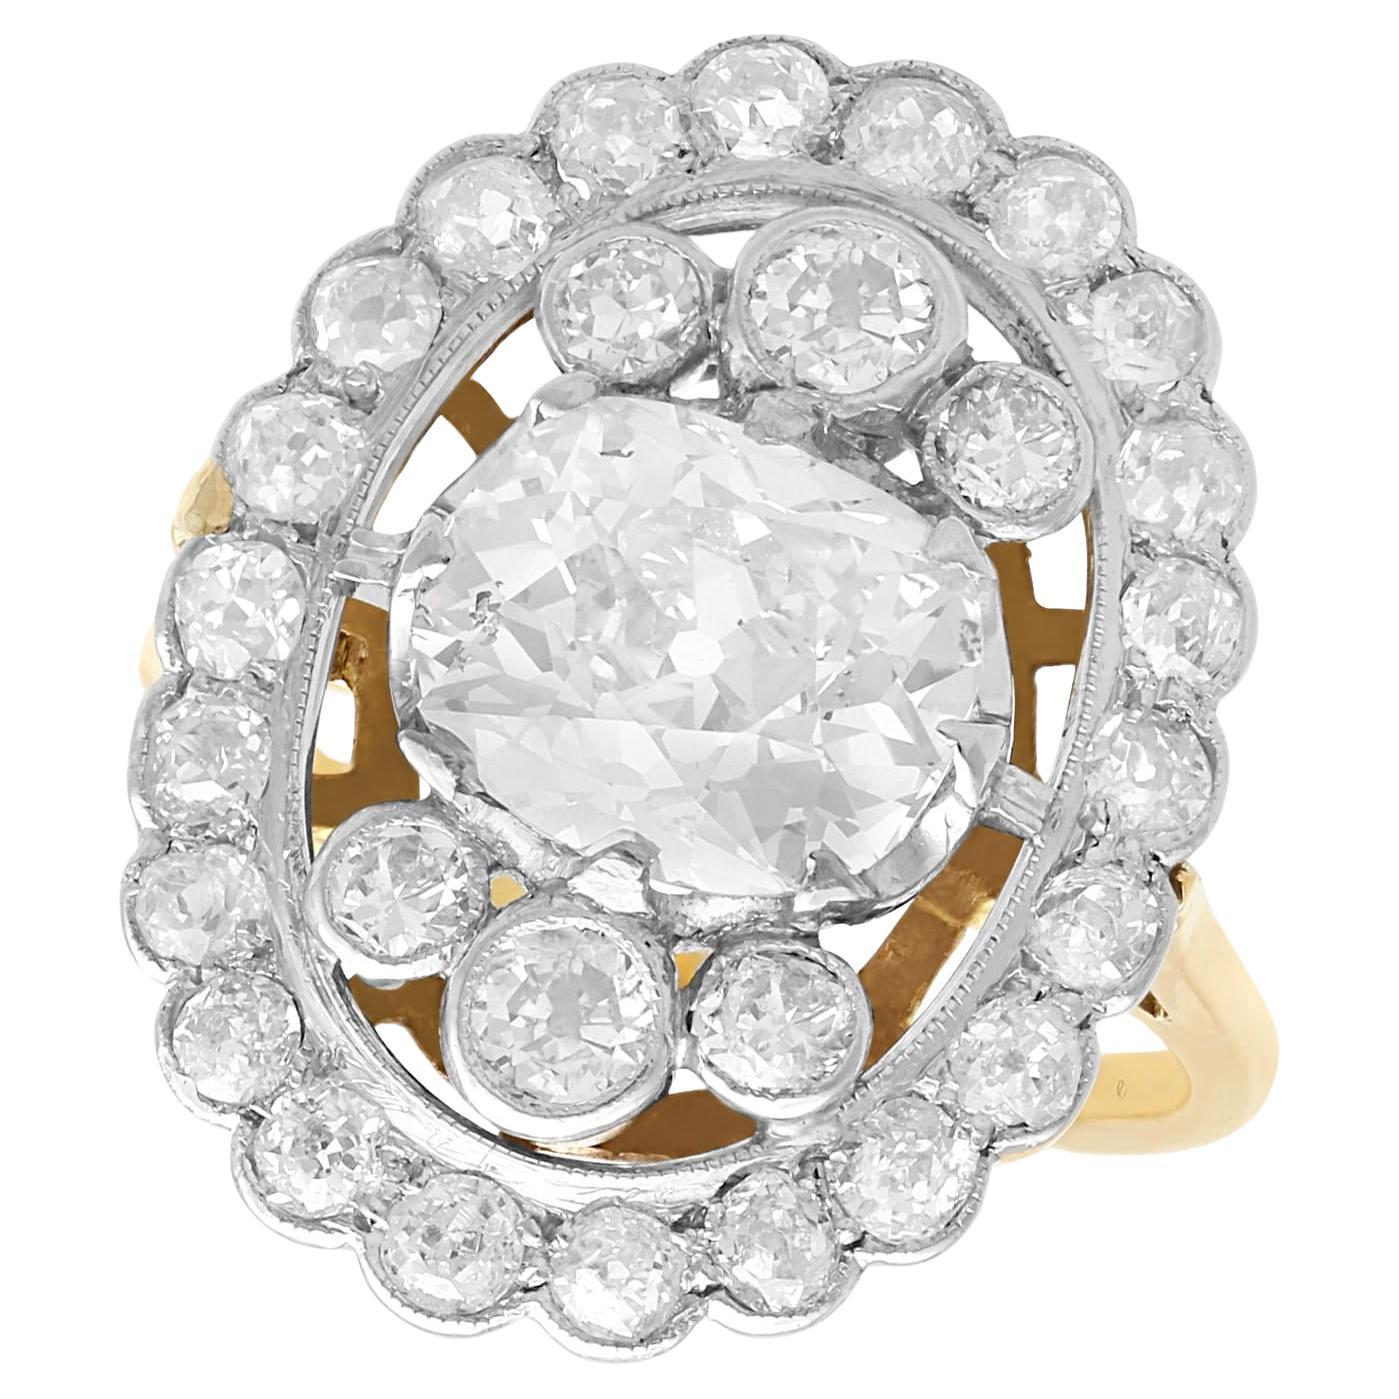 Antique 3.98Ct Diamond and 18k Yellow Gold Cluster Ring Circa 1925 For Sale